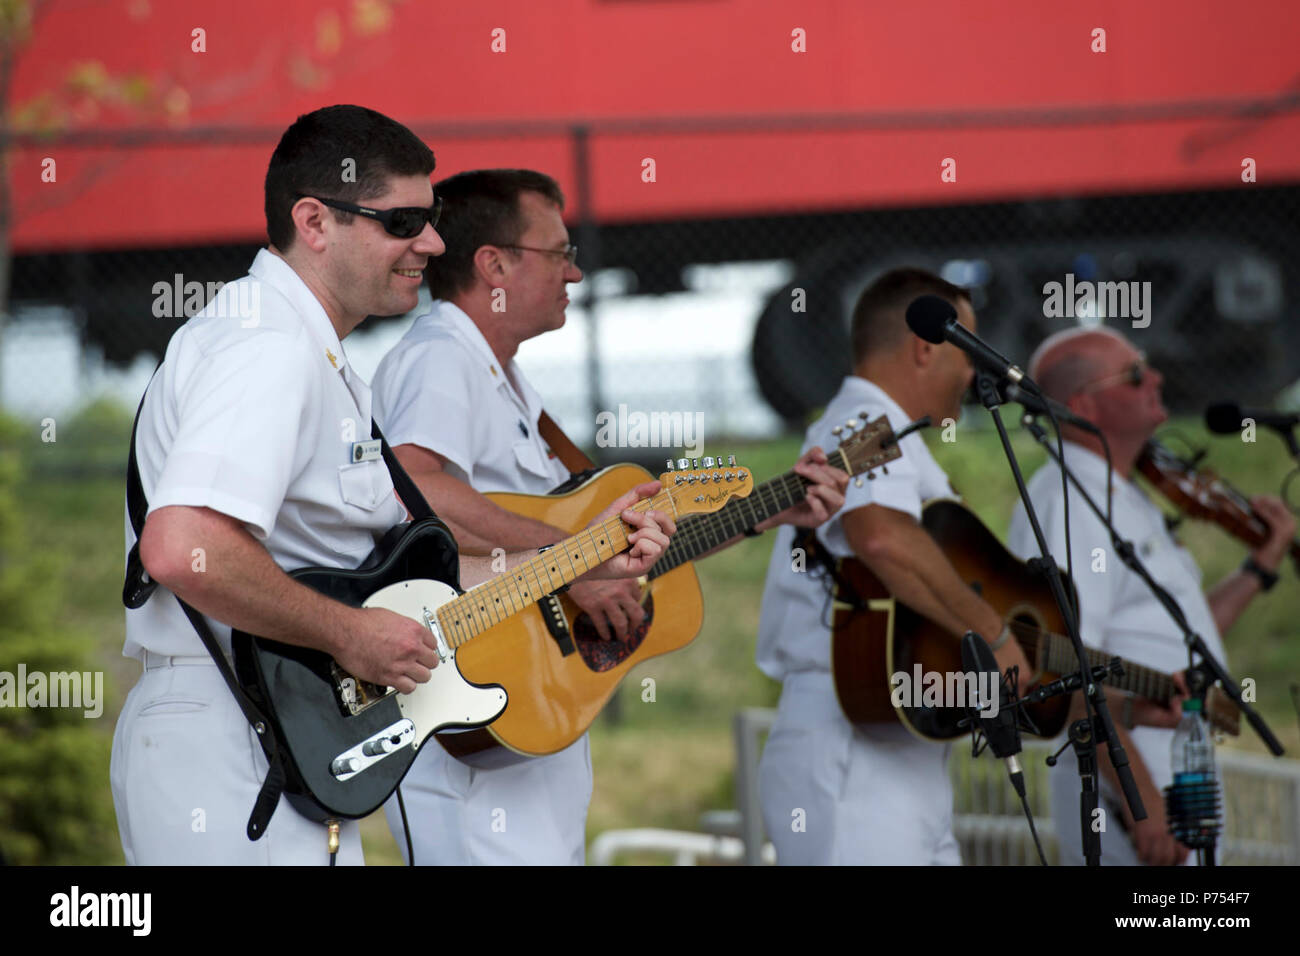 ST. PAUL, Minn. (Sept. 1, 2015) Musician 1st Class Joe Friedman, left, performs with the U.S. Navy Band Country Current at the Minnesota State Fair in St. Paul, Minn. The Navy Band's tour featured 14 performances in six states, reaching out to communities that don't normally see the Navy at work. Stock Photo